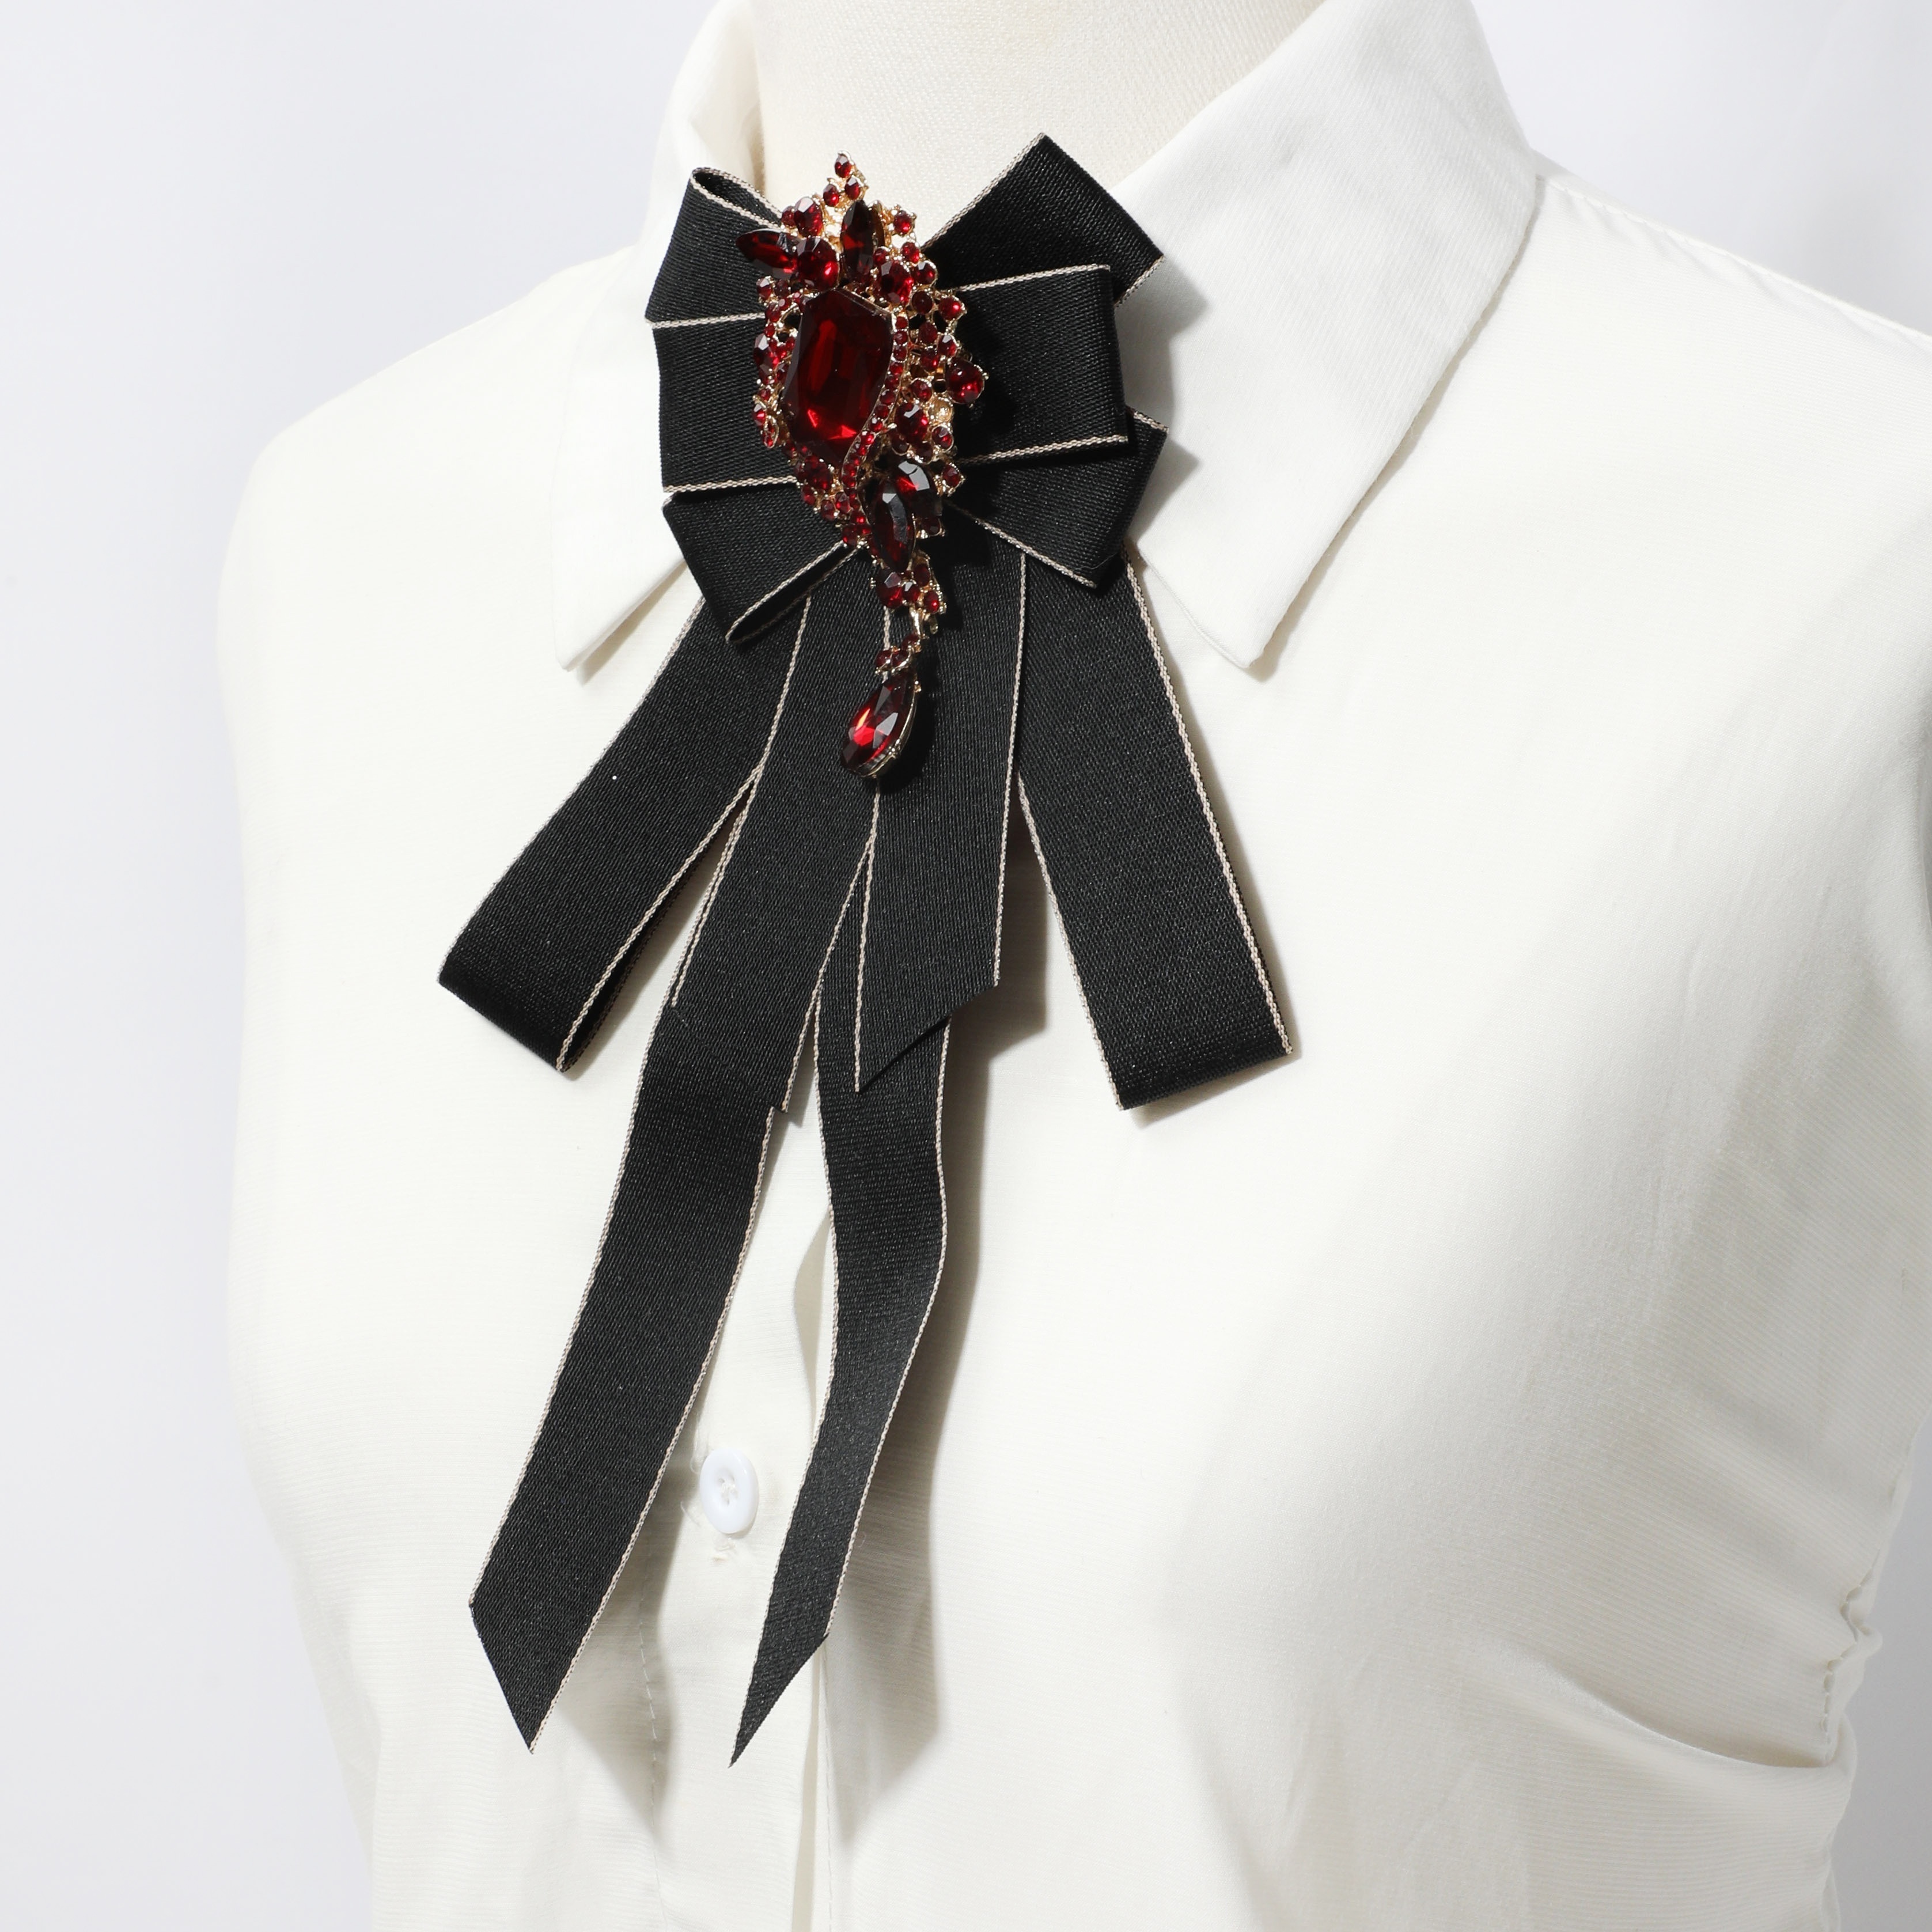 Neck bow for women Red white collar bow brooch Red bow tie p